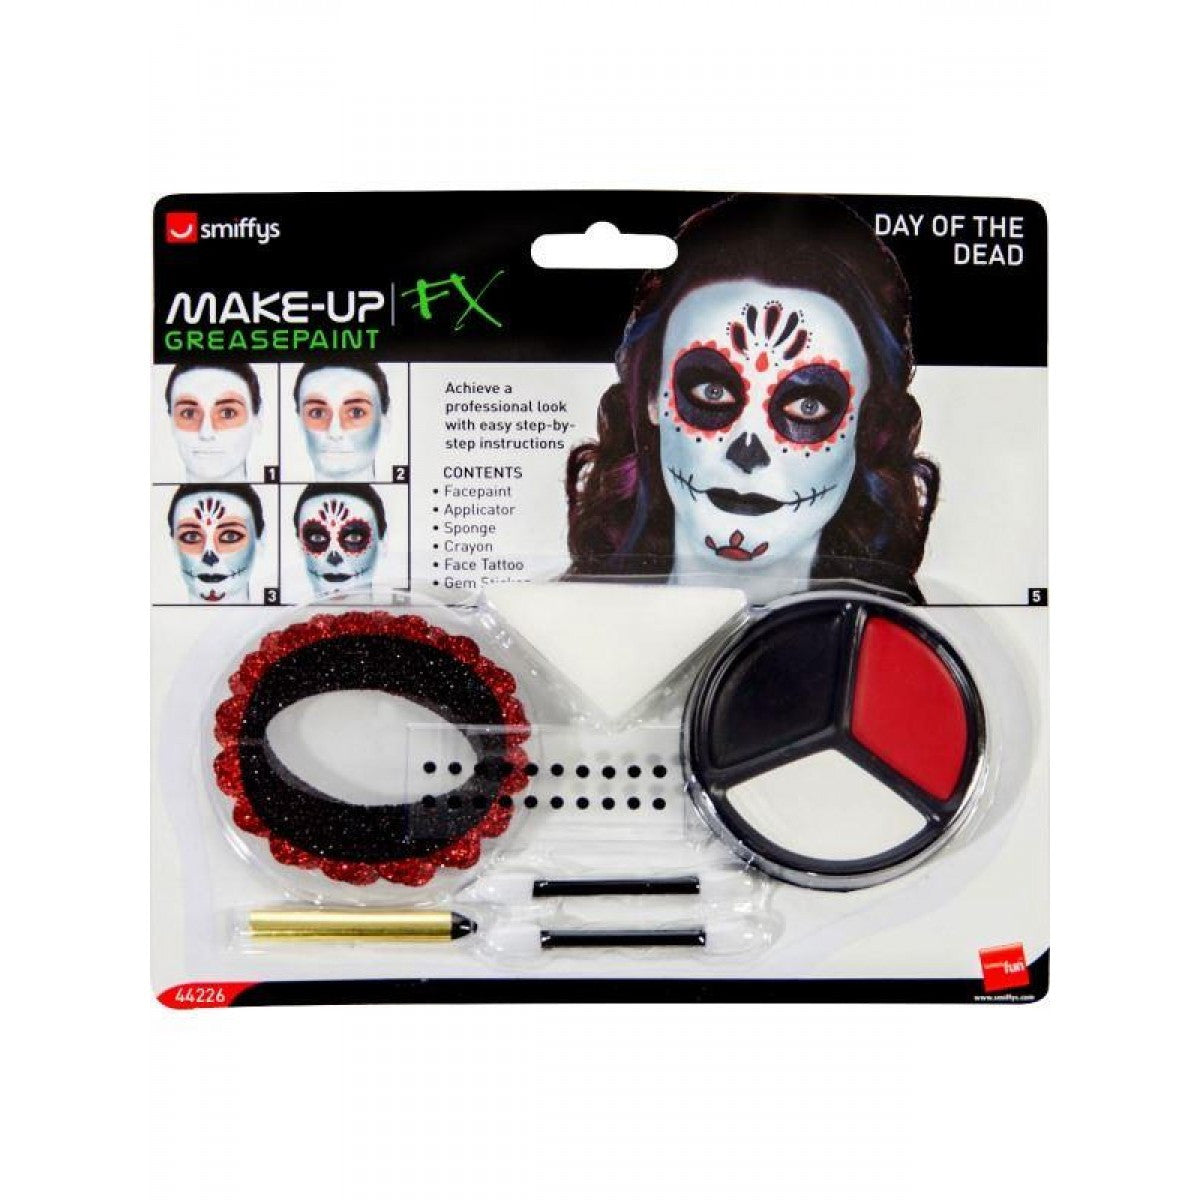 Day of the Dead Makeup Kit